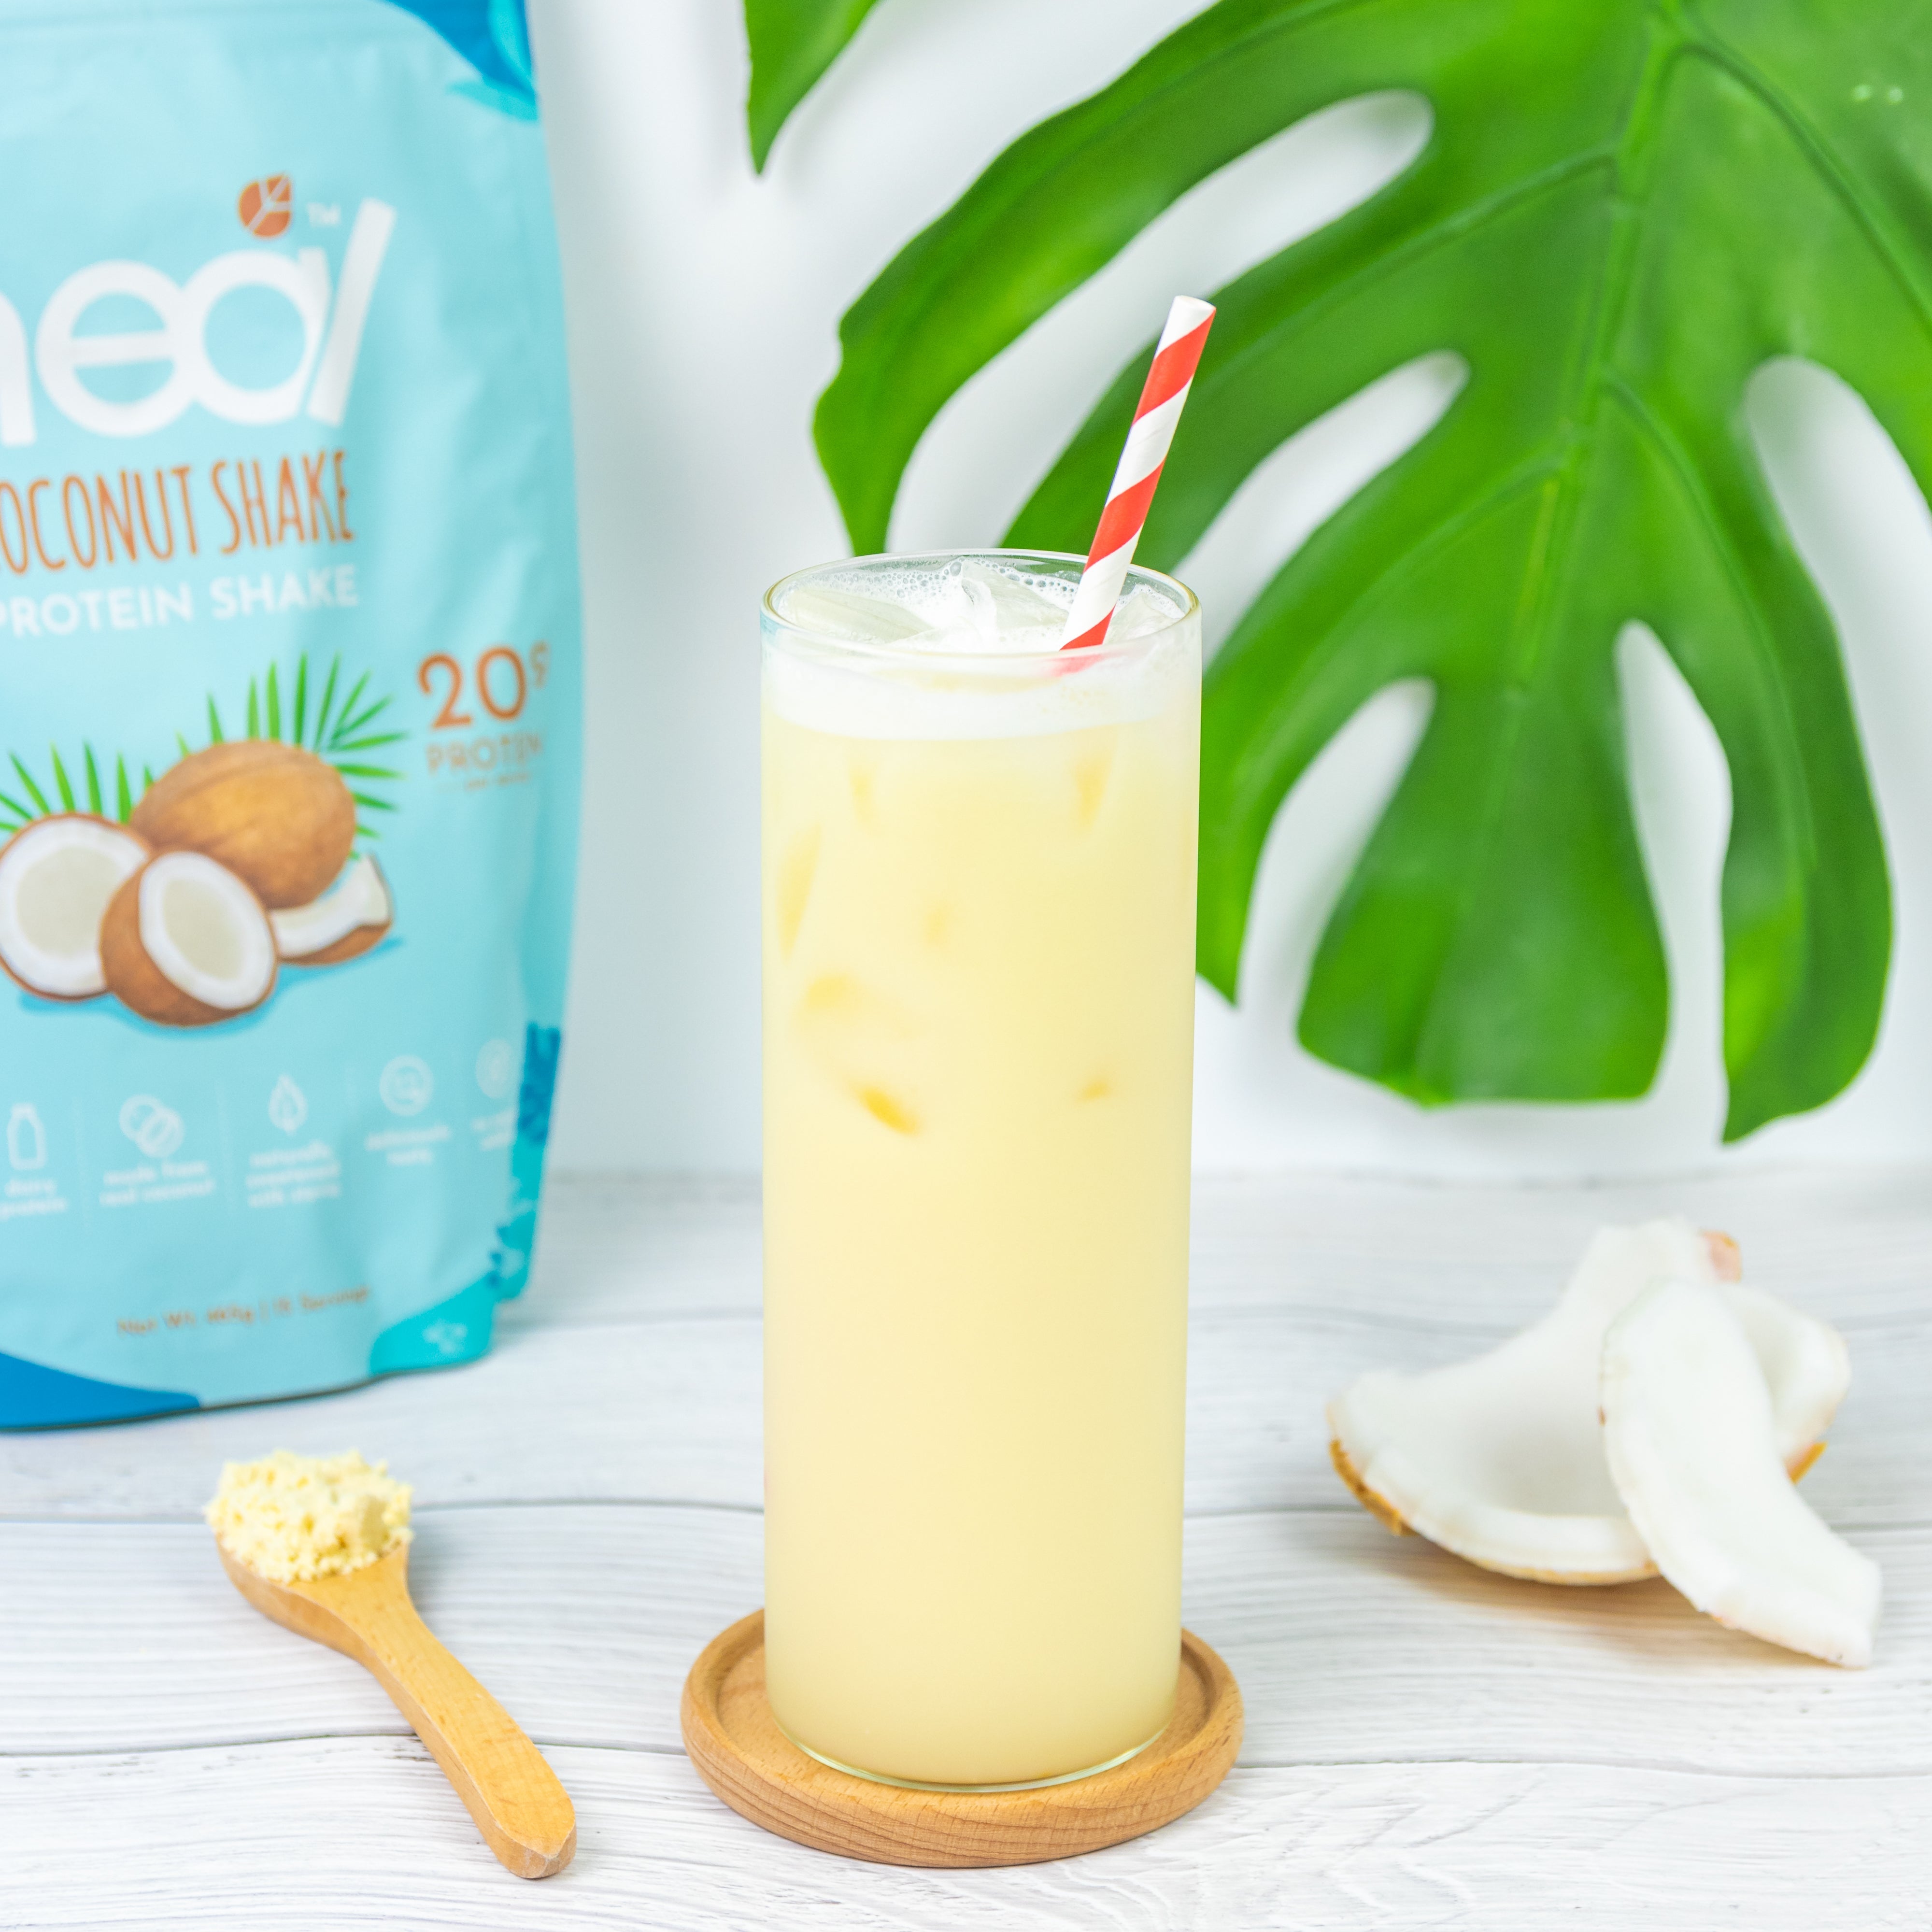 [Subscription Plan] Heal Coconut Shake Protein Shake, 15 Servings Value Pack